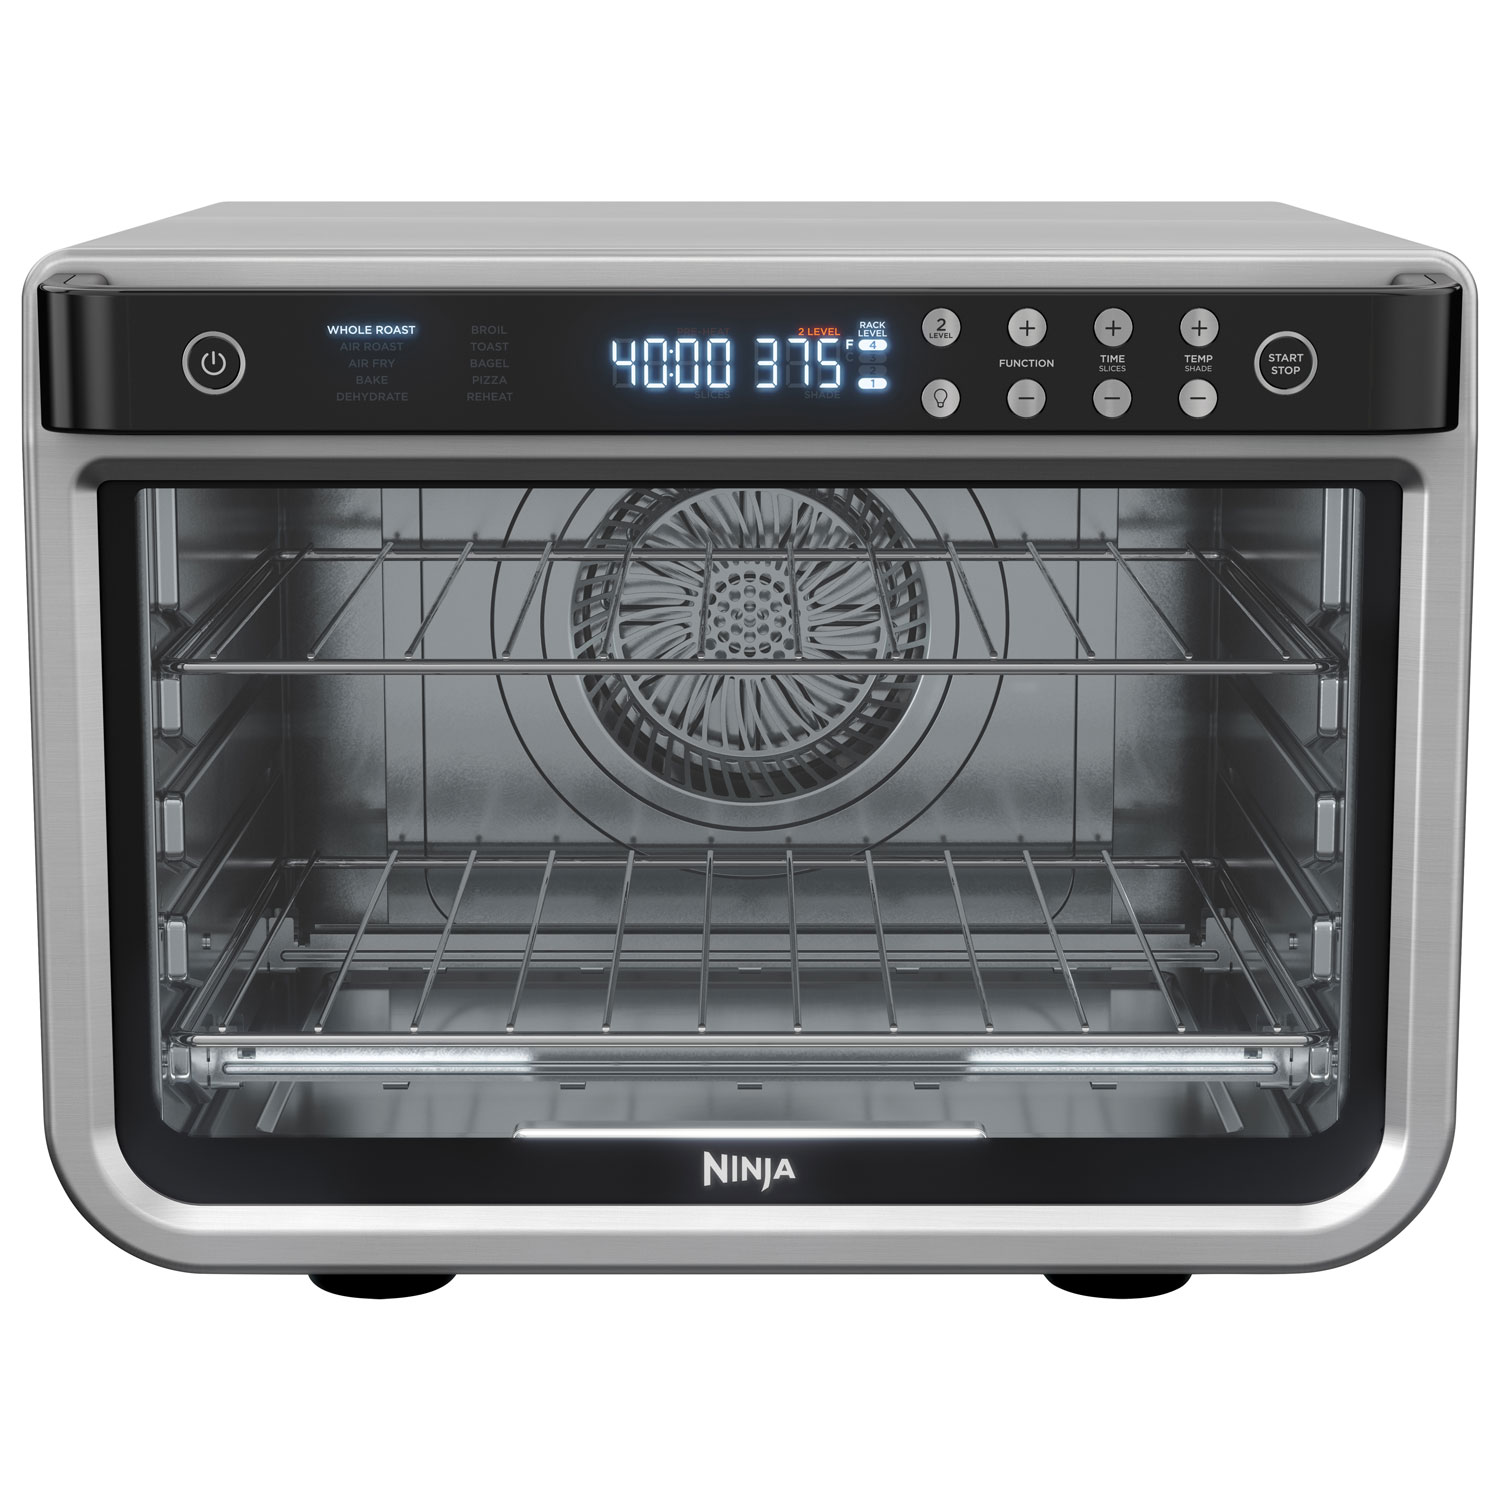 Ninja Foodi XL Pro Air Fry Toaster Oven (DT201C) - 0.25 Cu. Ft./7.2L - Stainless Steel